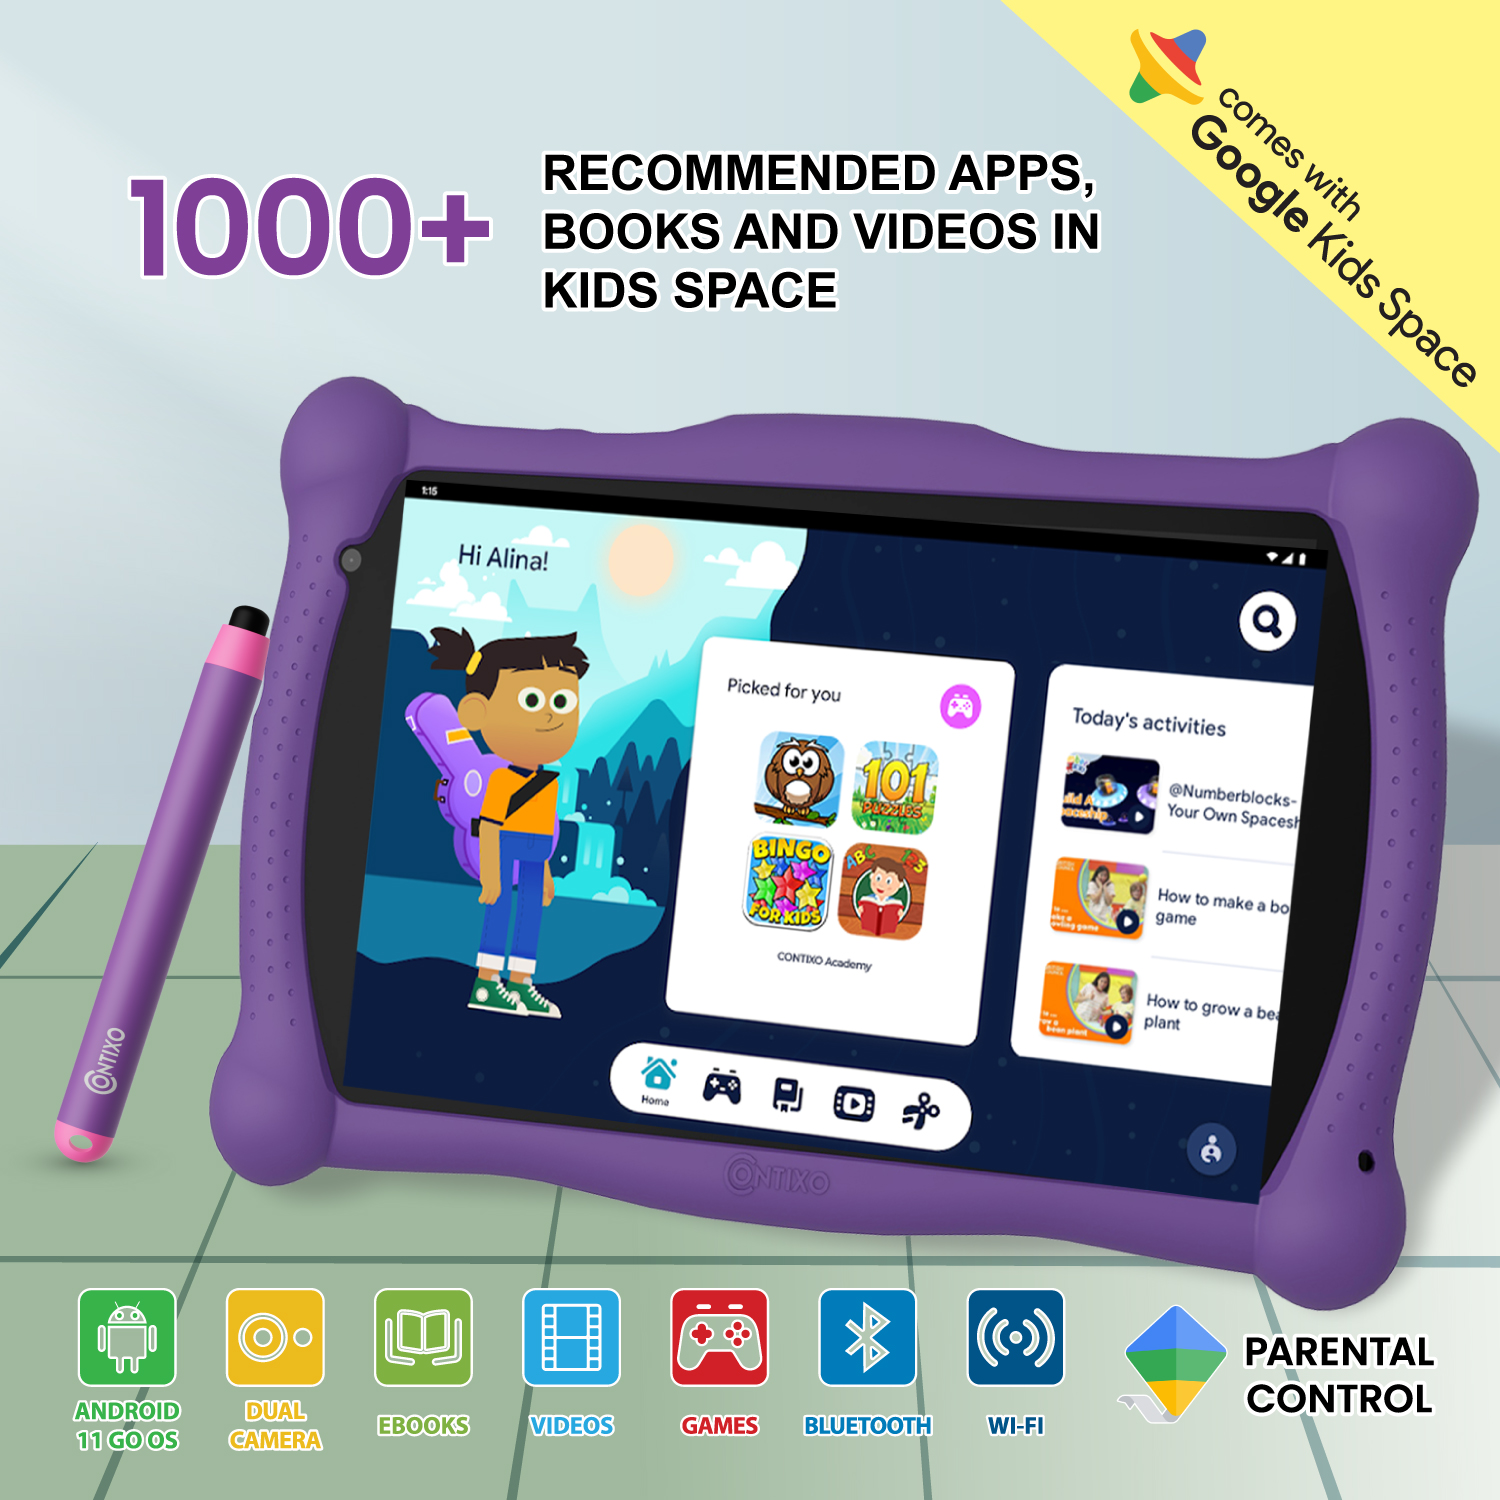 Contixo 7" Kids Learning Tablet HD Touch Screen, WiFi, Android 11, 2GB RAM, 32GB ROM, Protective Case with Kickstand, Age 3-9, V8-3-ST Purple - image 2 of 8